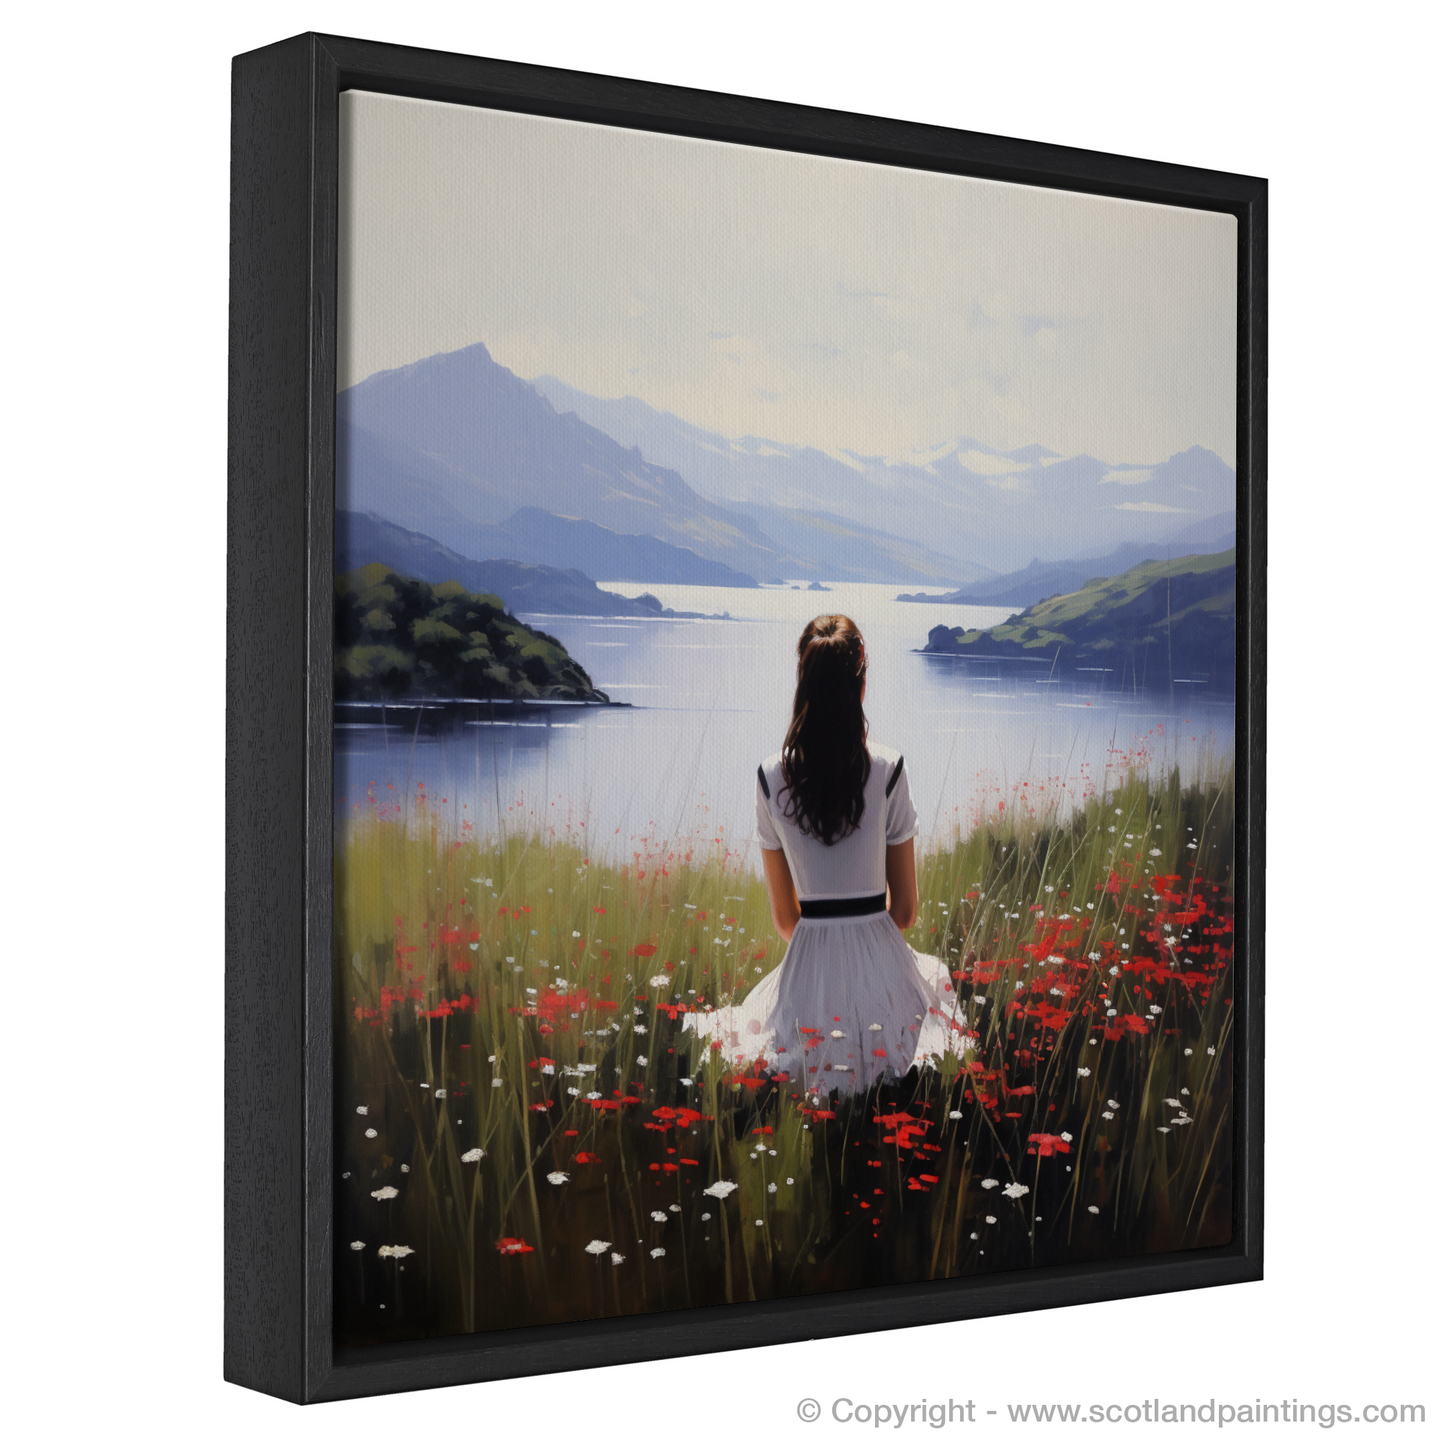 Painting and Art Print of Wildflowers by Loch Lomond entitled "Wildflowers by Loch Lomond: A Tranquil Scottish Retreat".